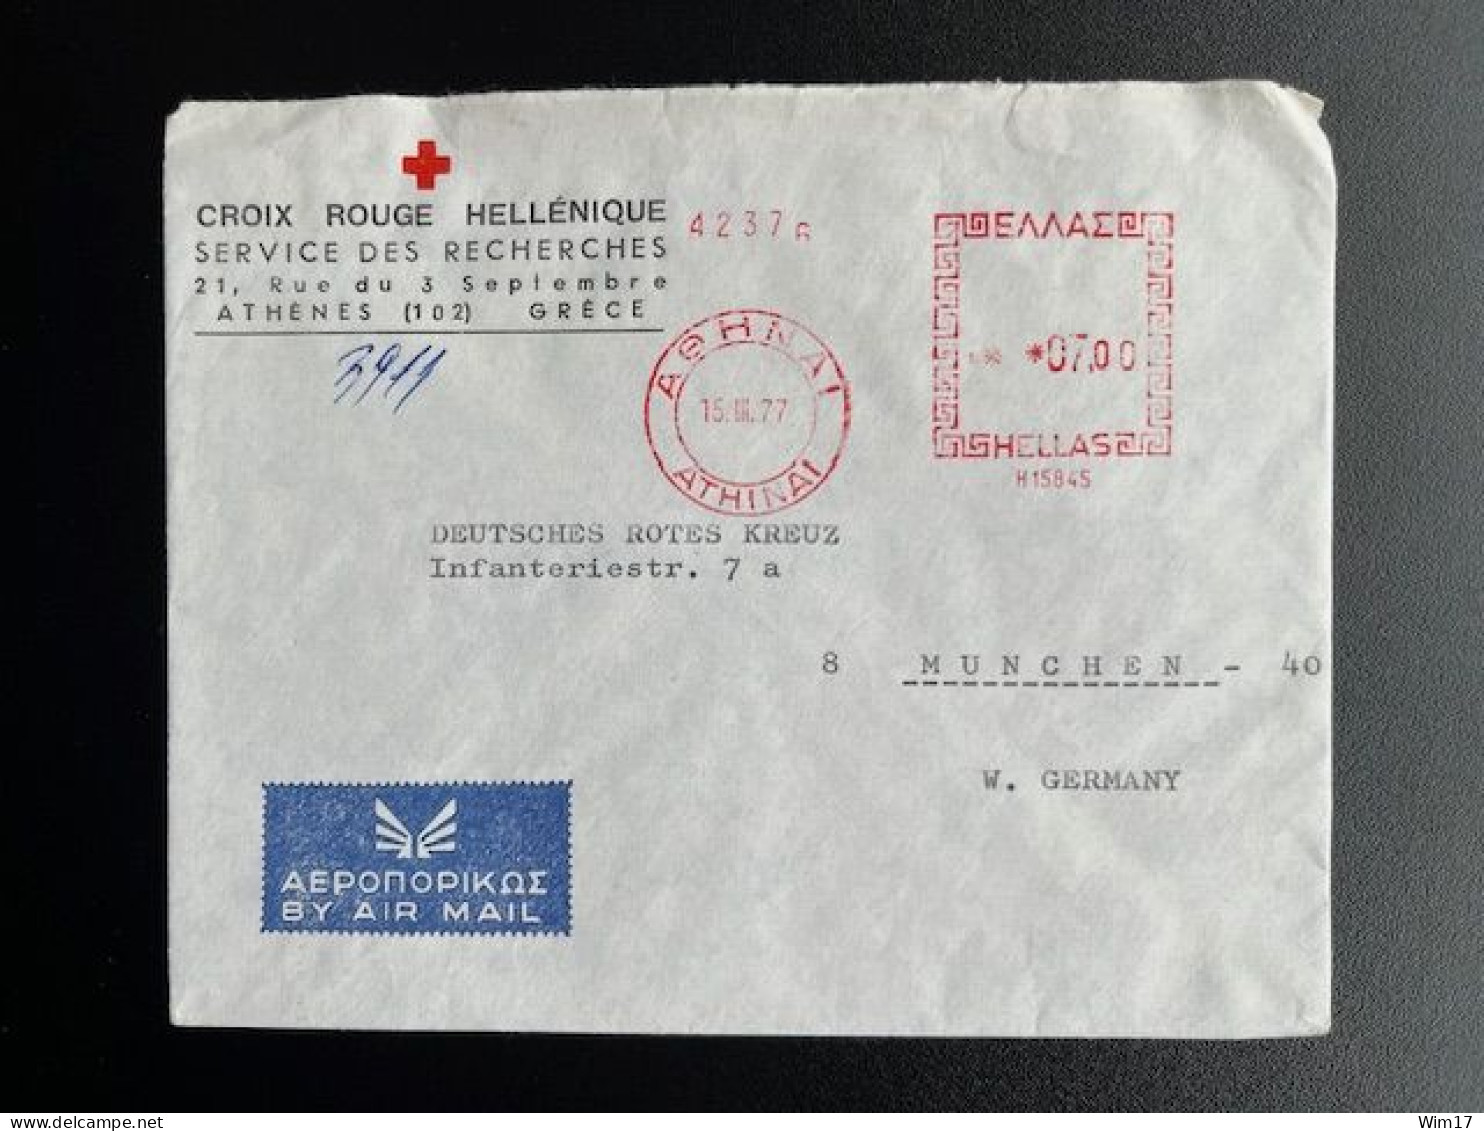 GREECE 1977 LETTER ATHENS TO MUNICH 15-03-1977 GRIEKENLAND RED CROSS - Storia Postale